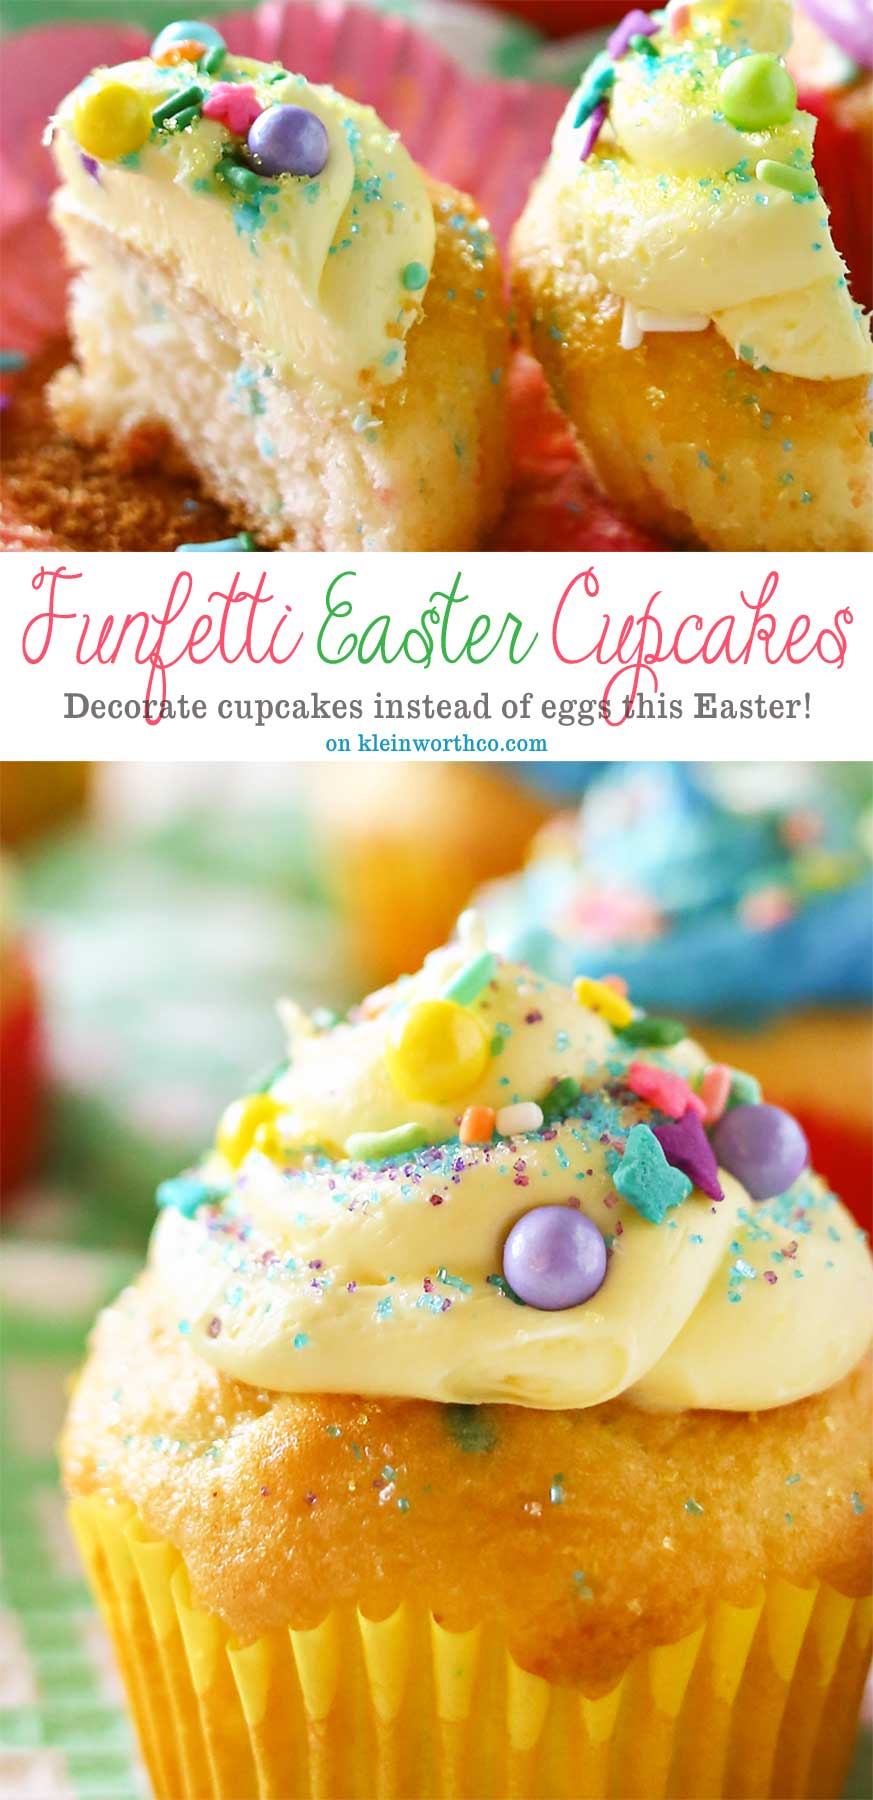 Have fun & get creative with this Easter with Funfetti® Easter Cupcakes. They are an adorable Easter dessert idea that's great for your celebration! Decorating cupcakes is so much more fun than decorating eggs. With vibrant colors & an abundance of sprinkles, we can really bring out the imagination too.